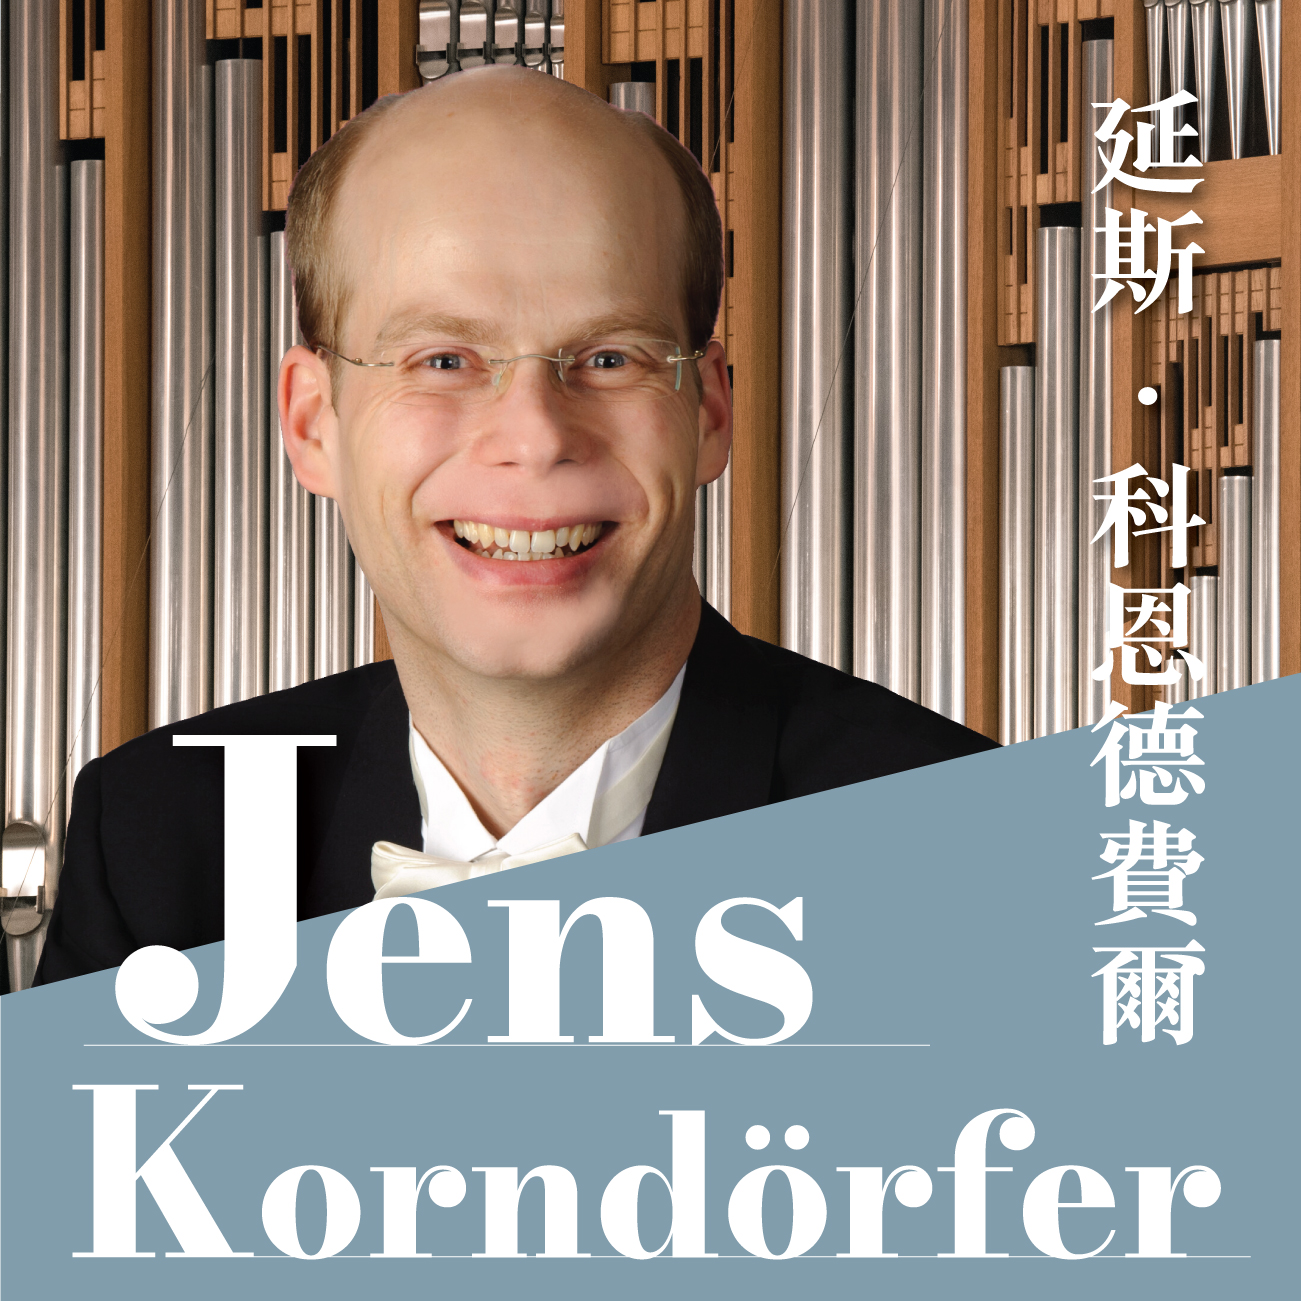 Organ Music Appreciation and Performance Technique Workshops by Jens Korndörfer (Conducted in English)